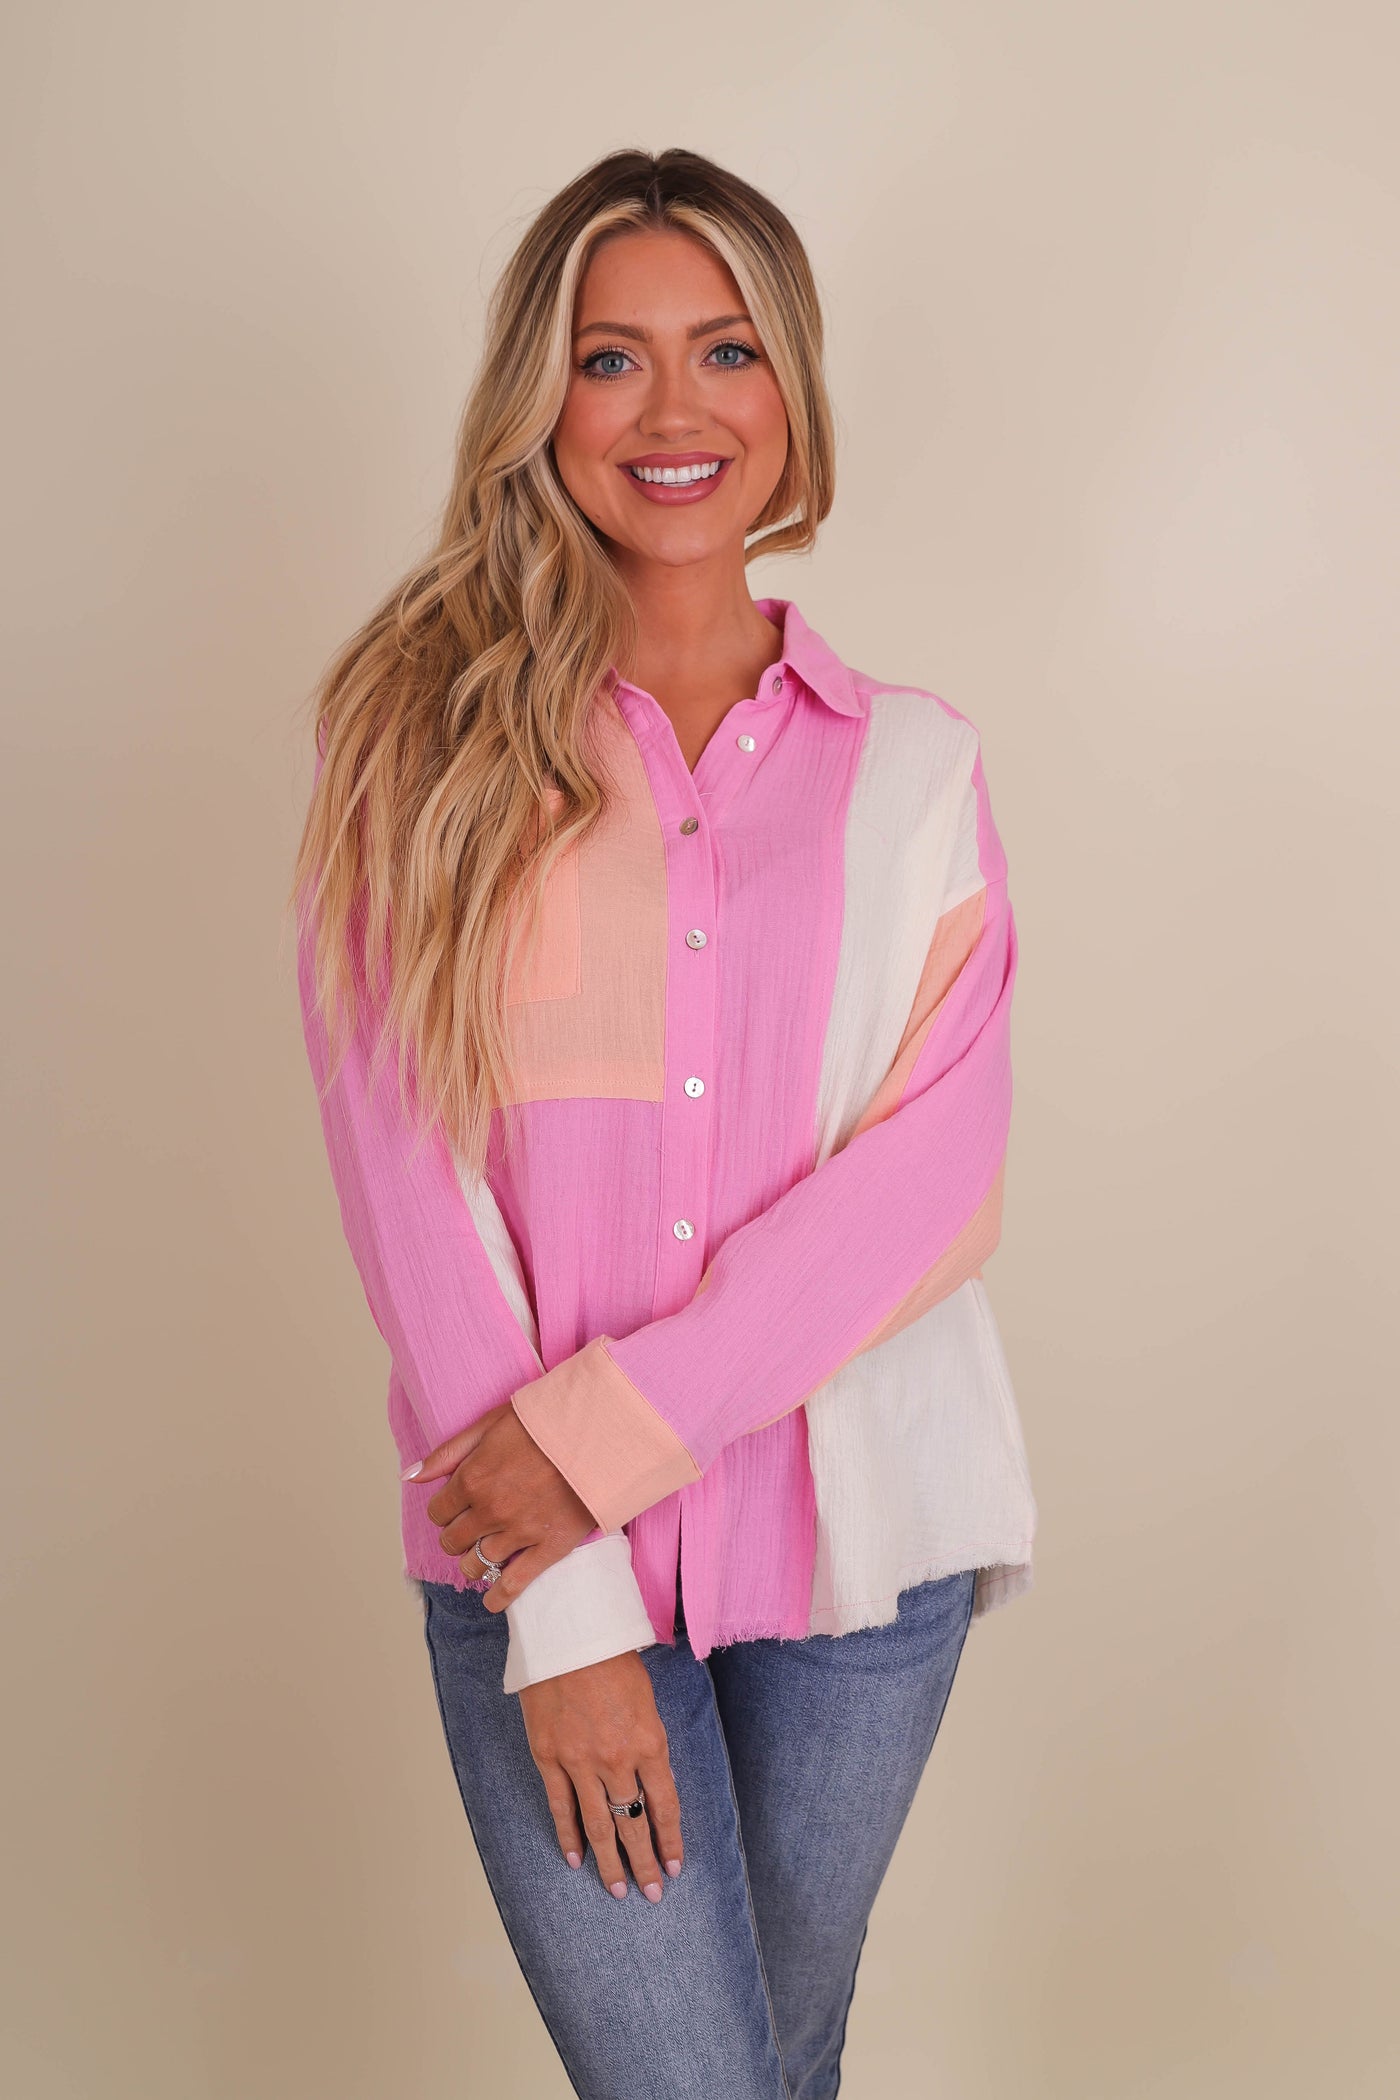 Women's Cotton Button Down- Women's Relaxed Fit Button Down- VeryJ Tops